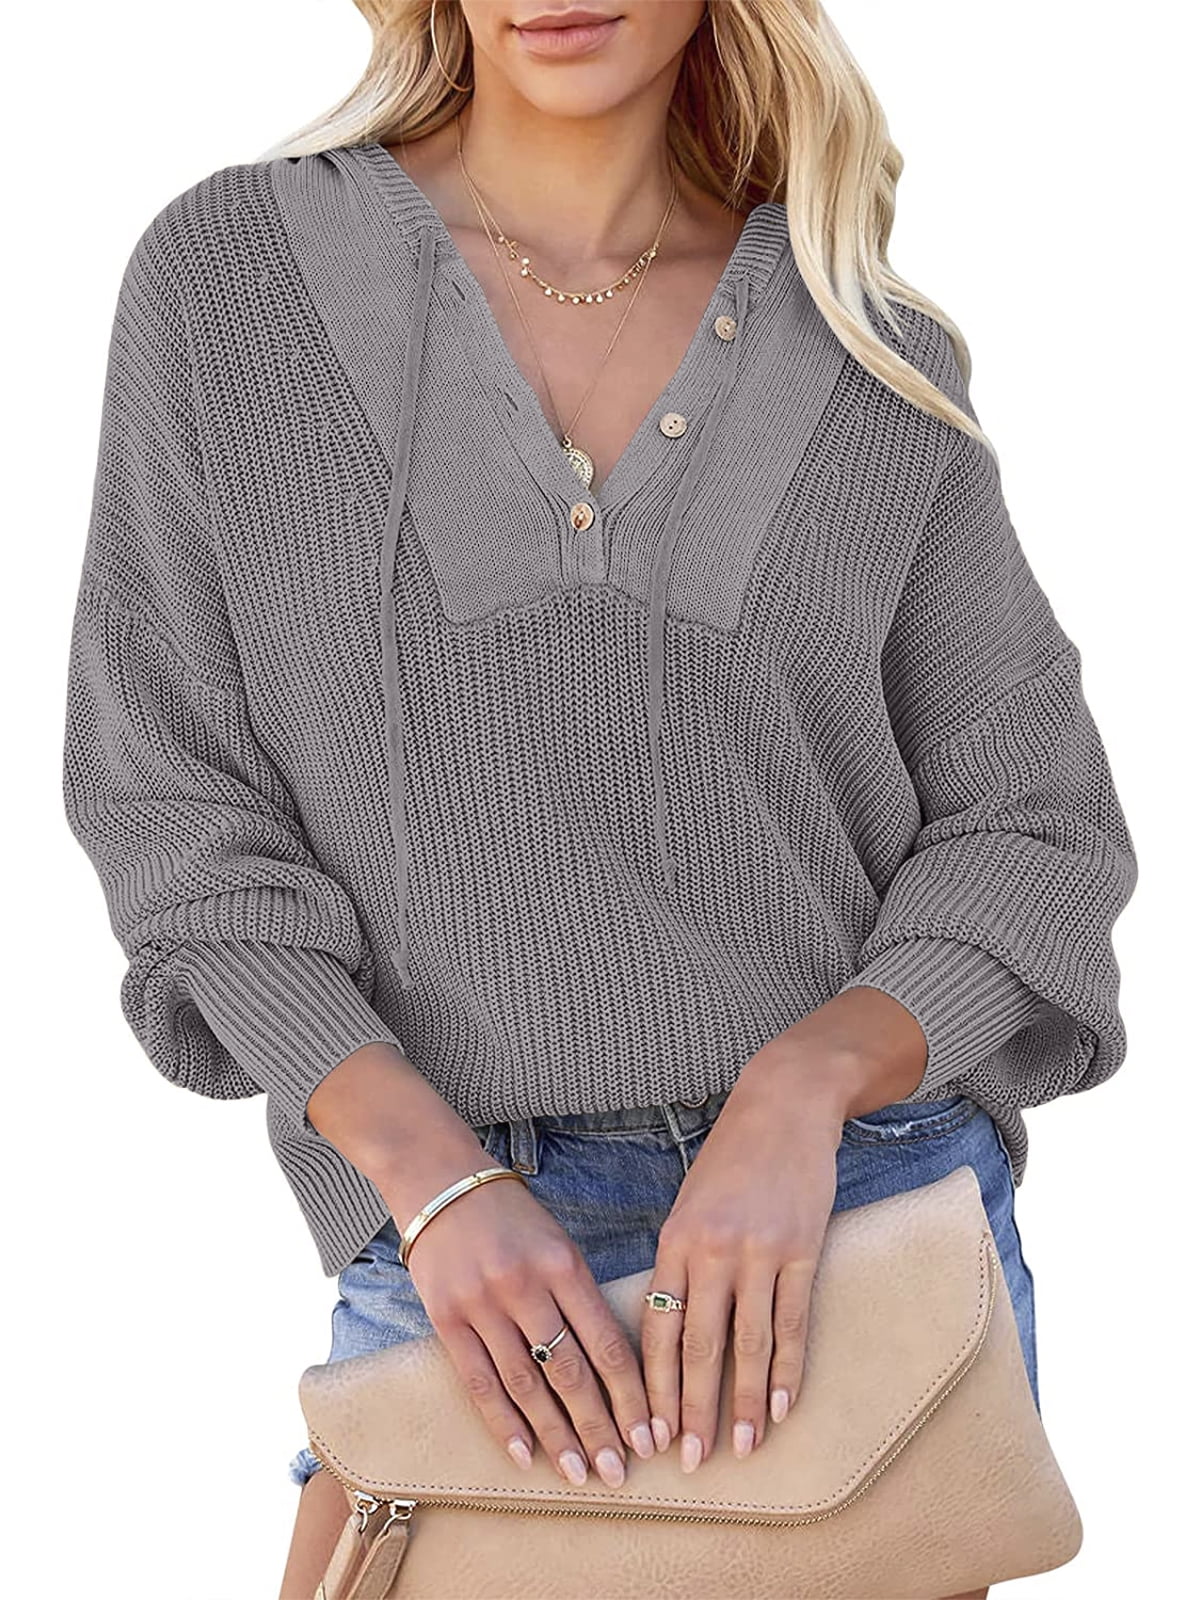 DEEP SELF Sweater For Women Hoodie Casual Loose Knit Sweaters Cozy ...